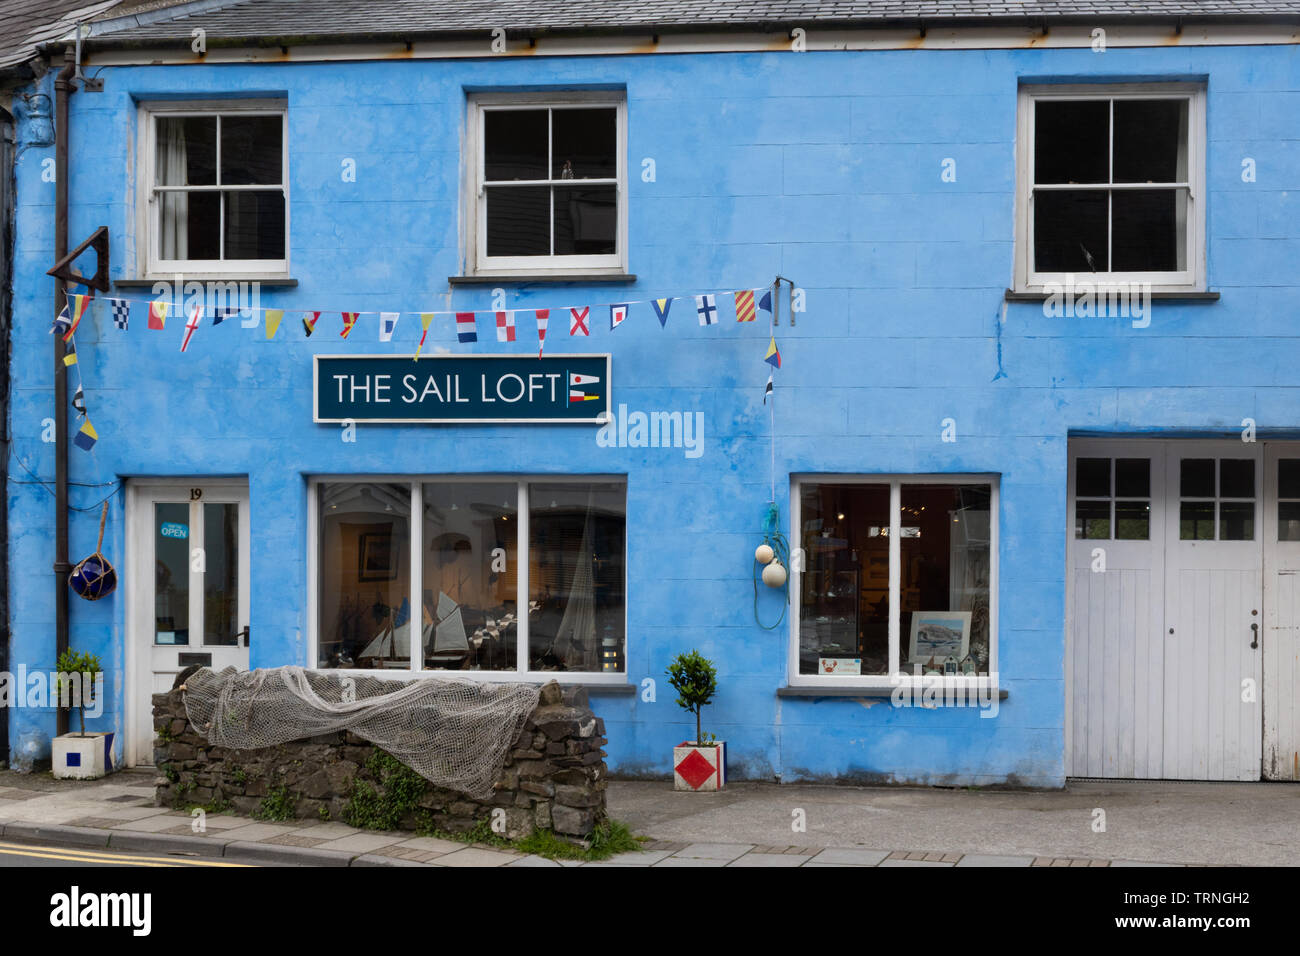 The Sail Loft Gallery and apartment, originally used for storing sails, now painted bright blue, in the conservation area of Solva, Pembrkeshire Wales Stock Photo